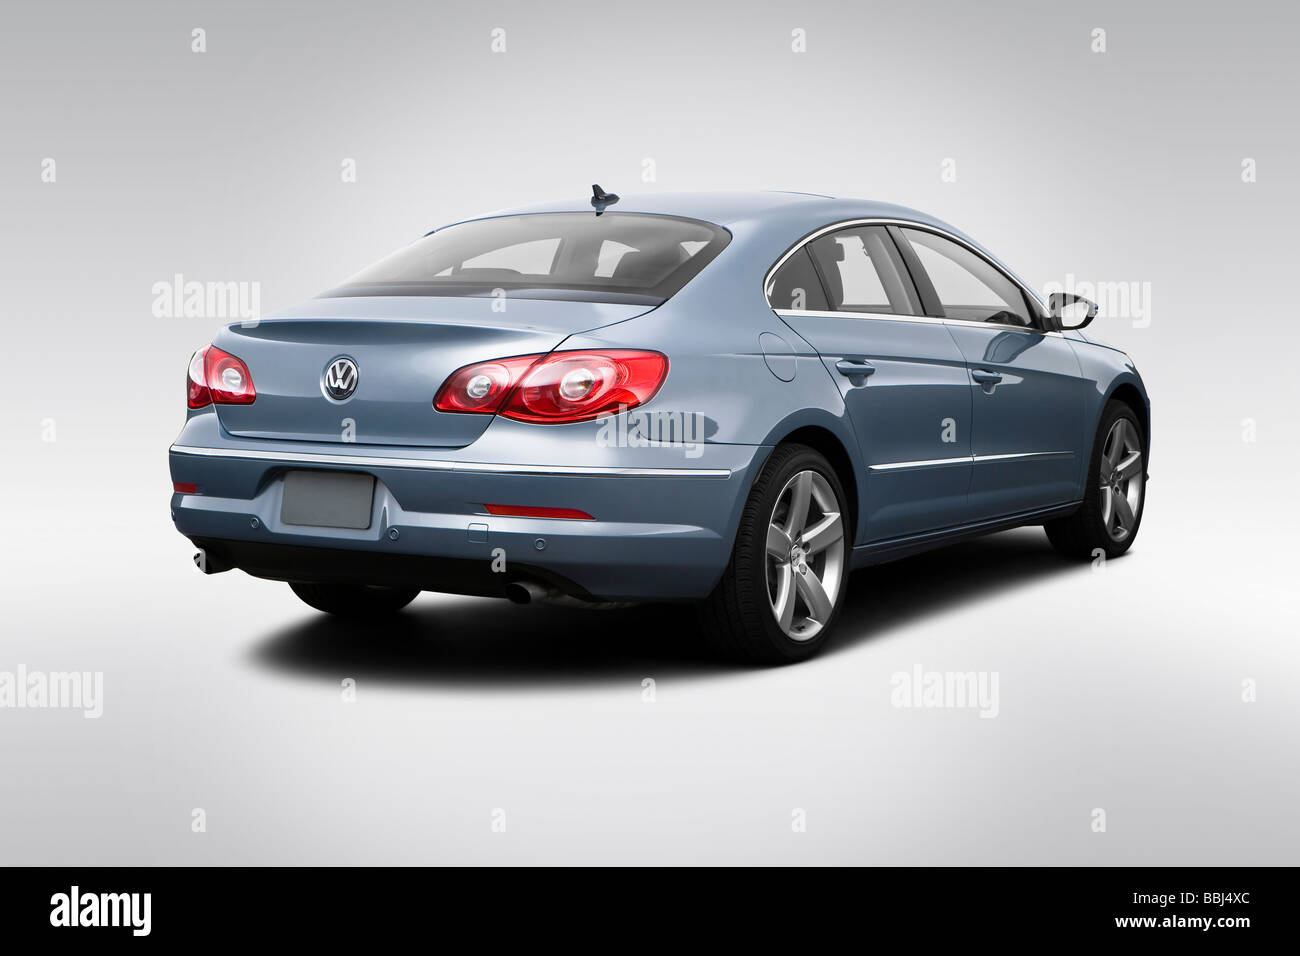 2009 Volkswagen CC VR6 in Gray - Rear angle view Stock Photo